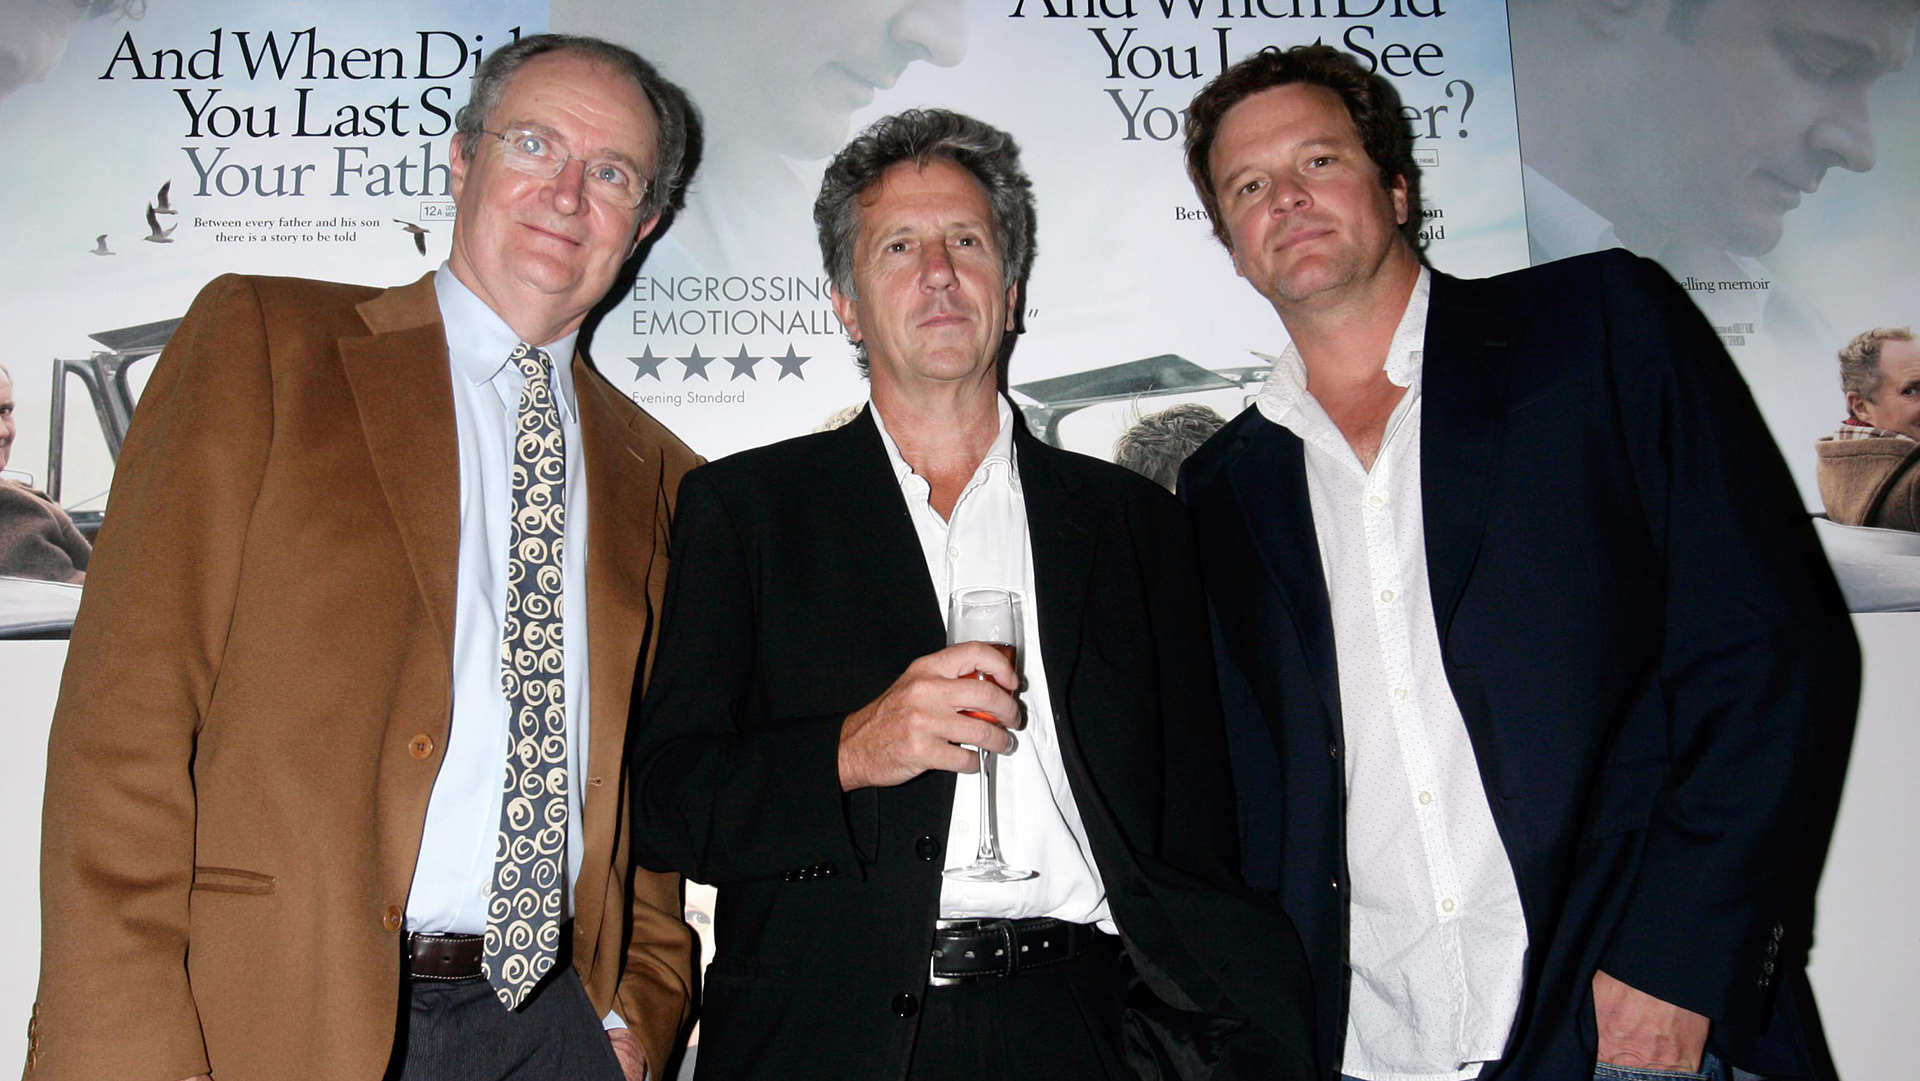 Jim Broadbent, Blake Morrison holding a glass of champagne and Colin Firth stand facing the camera